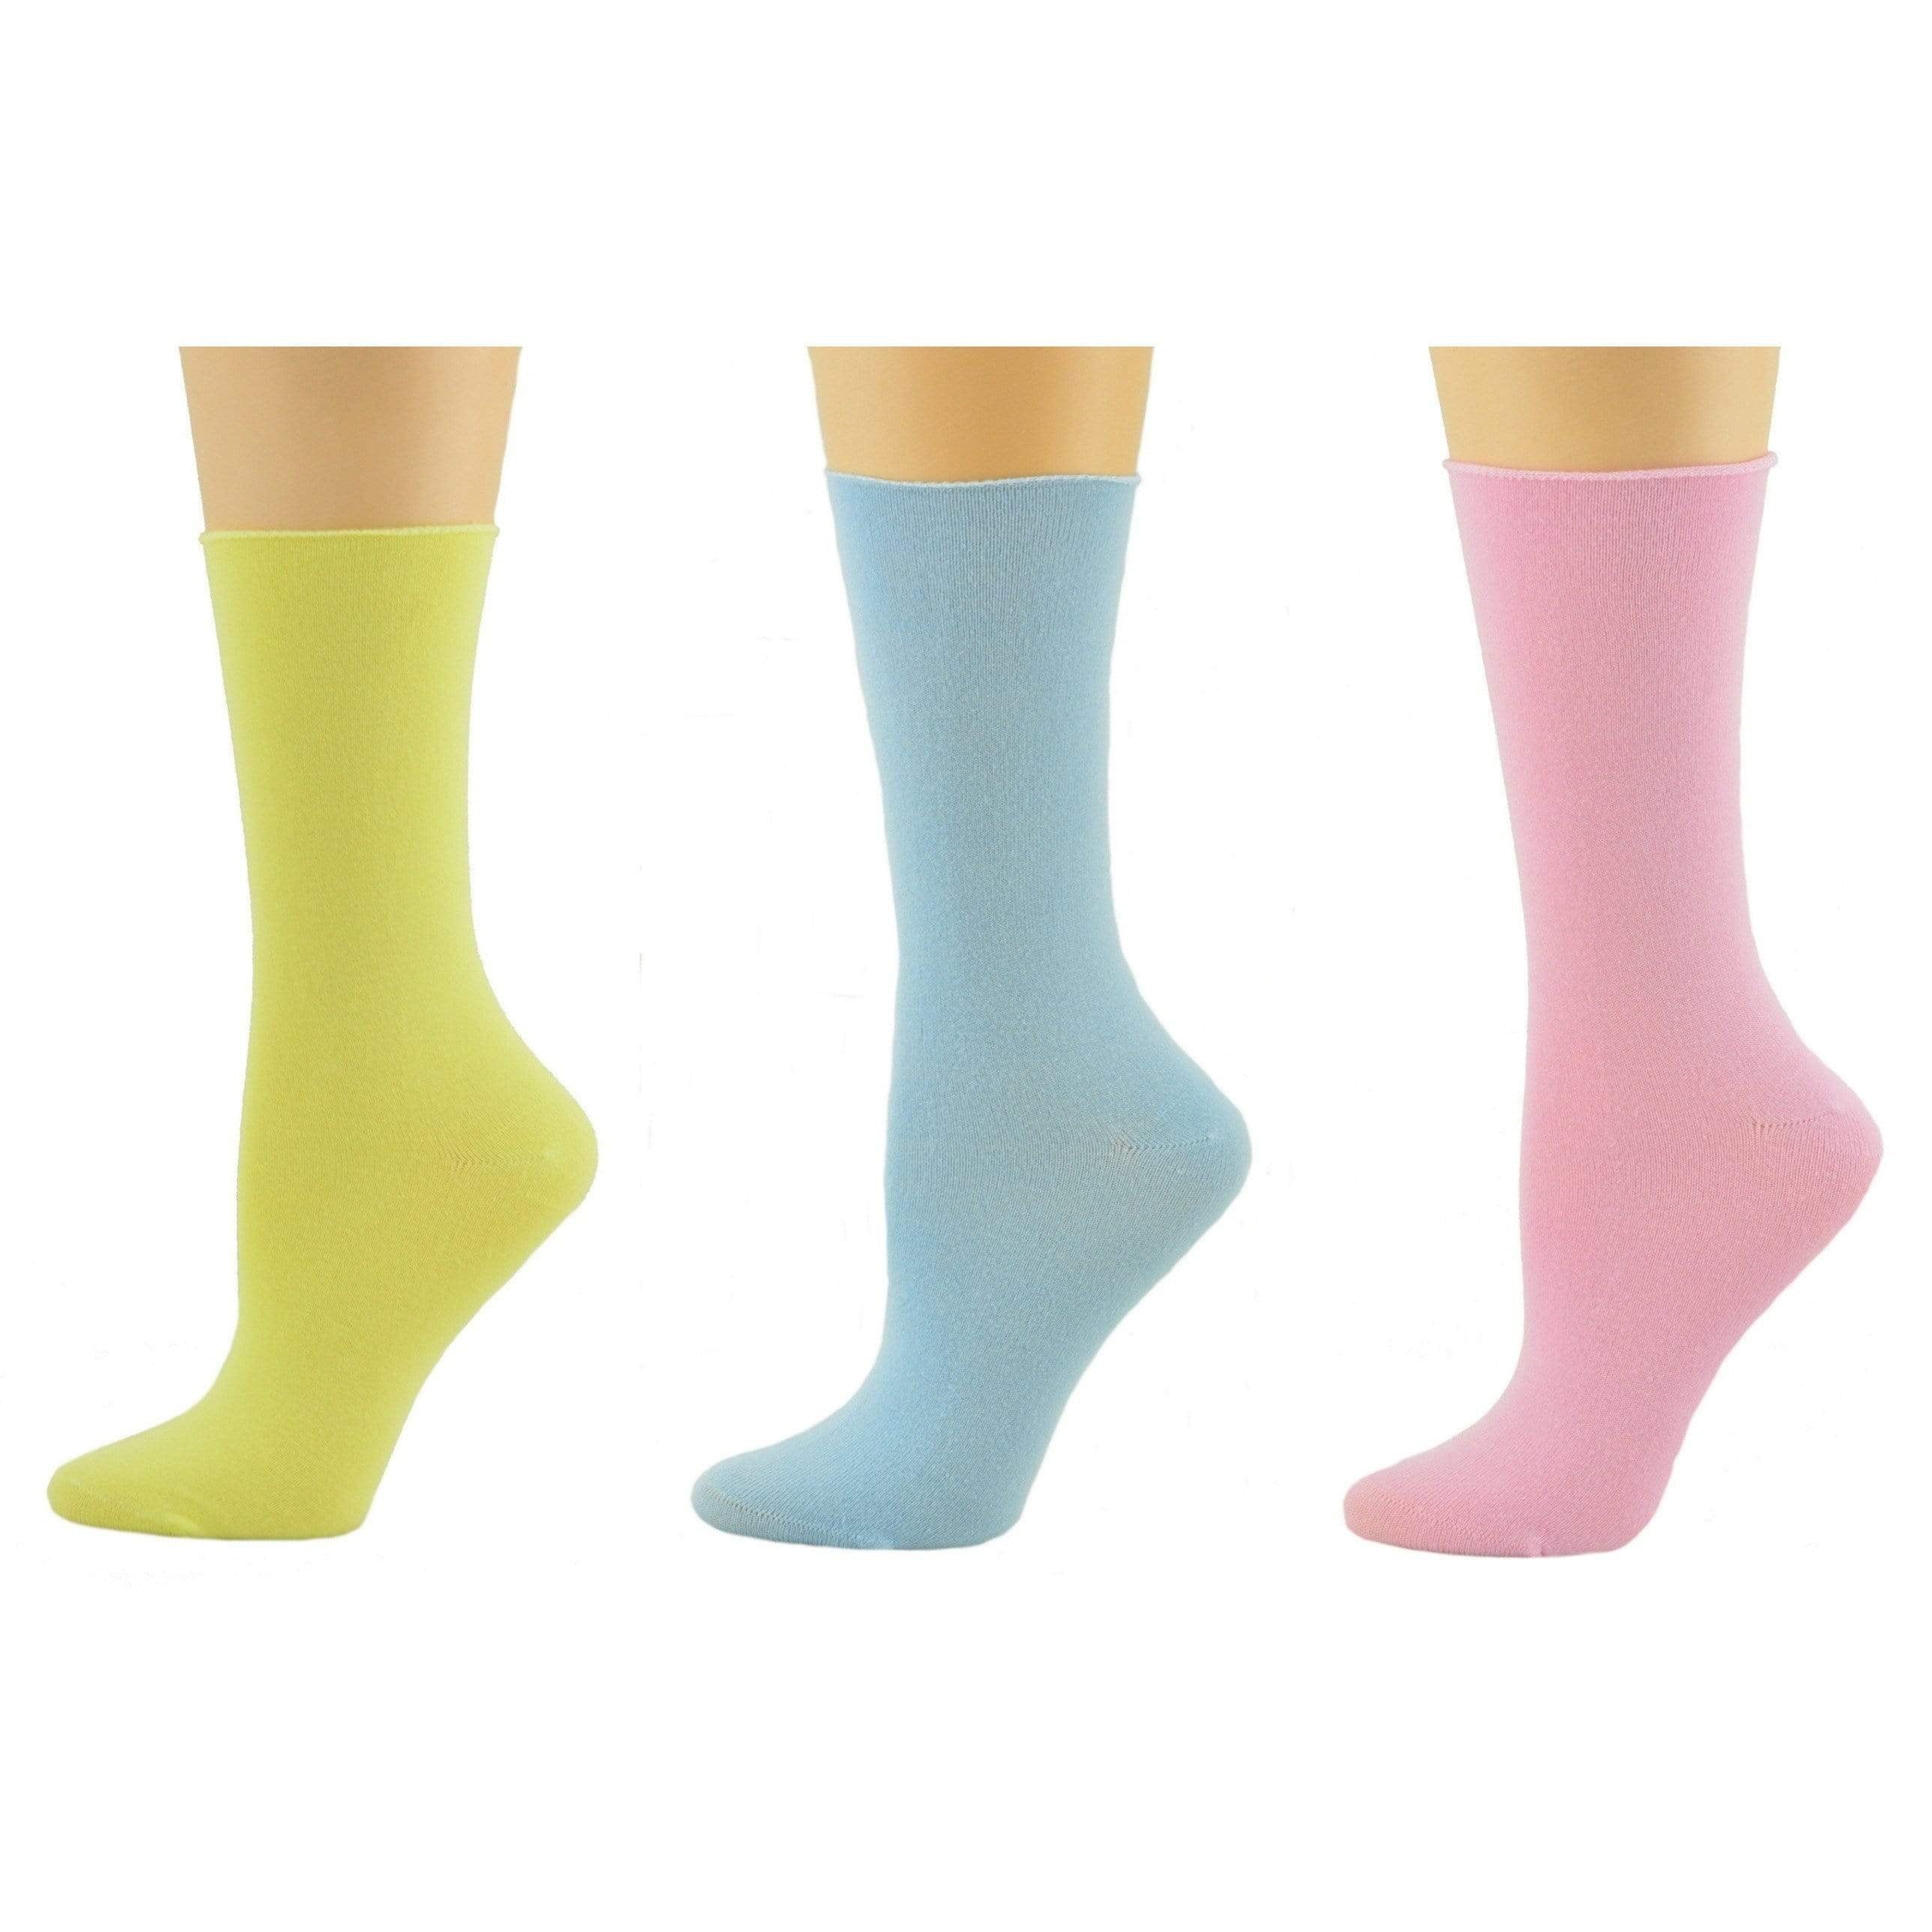 New Hot Candy Colors Net Super Thin Soft Socks for Baby Kids 